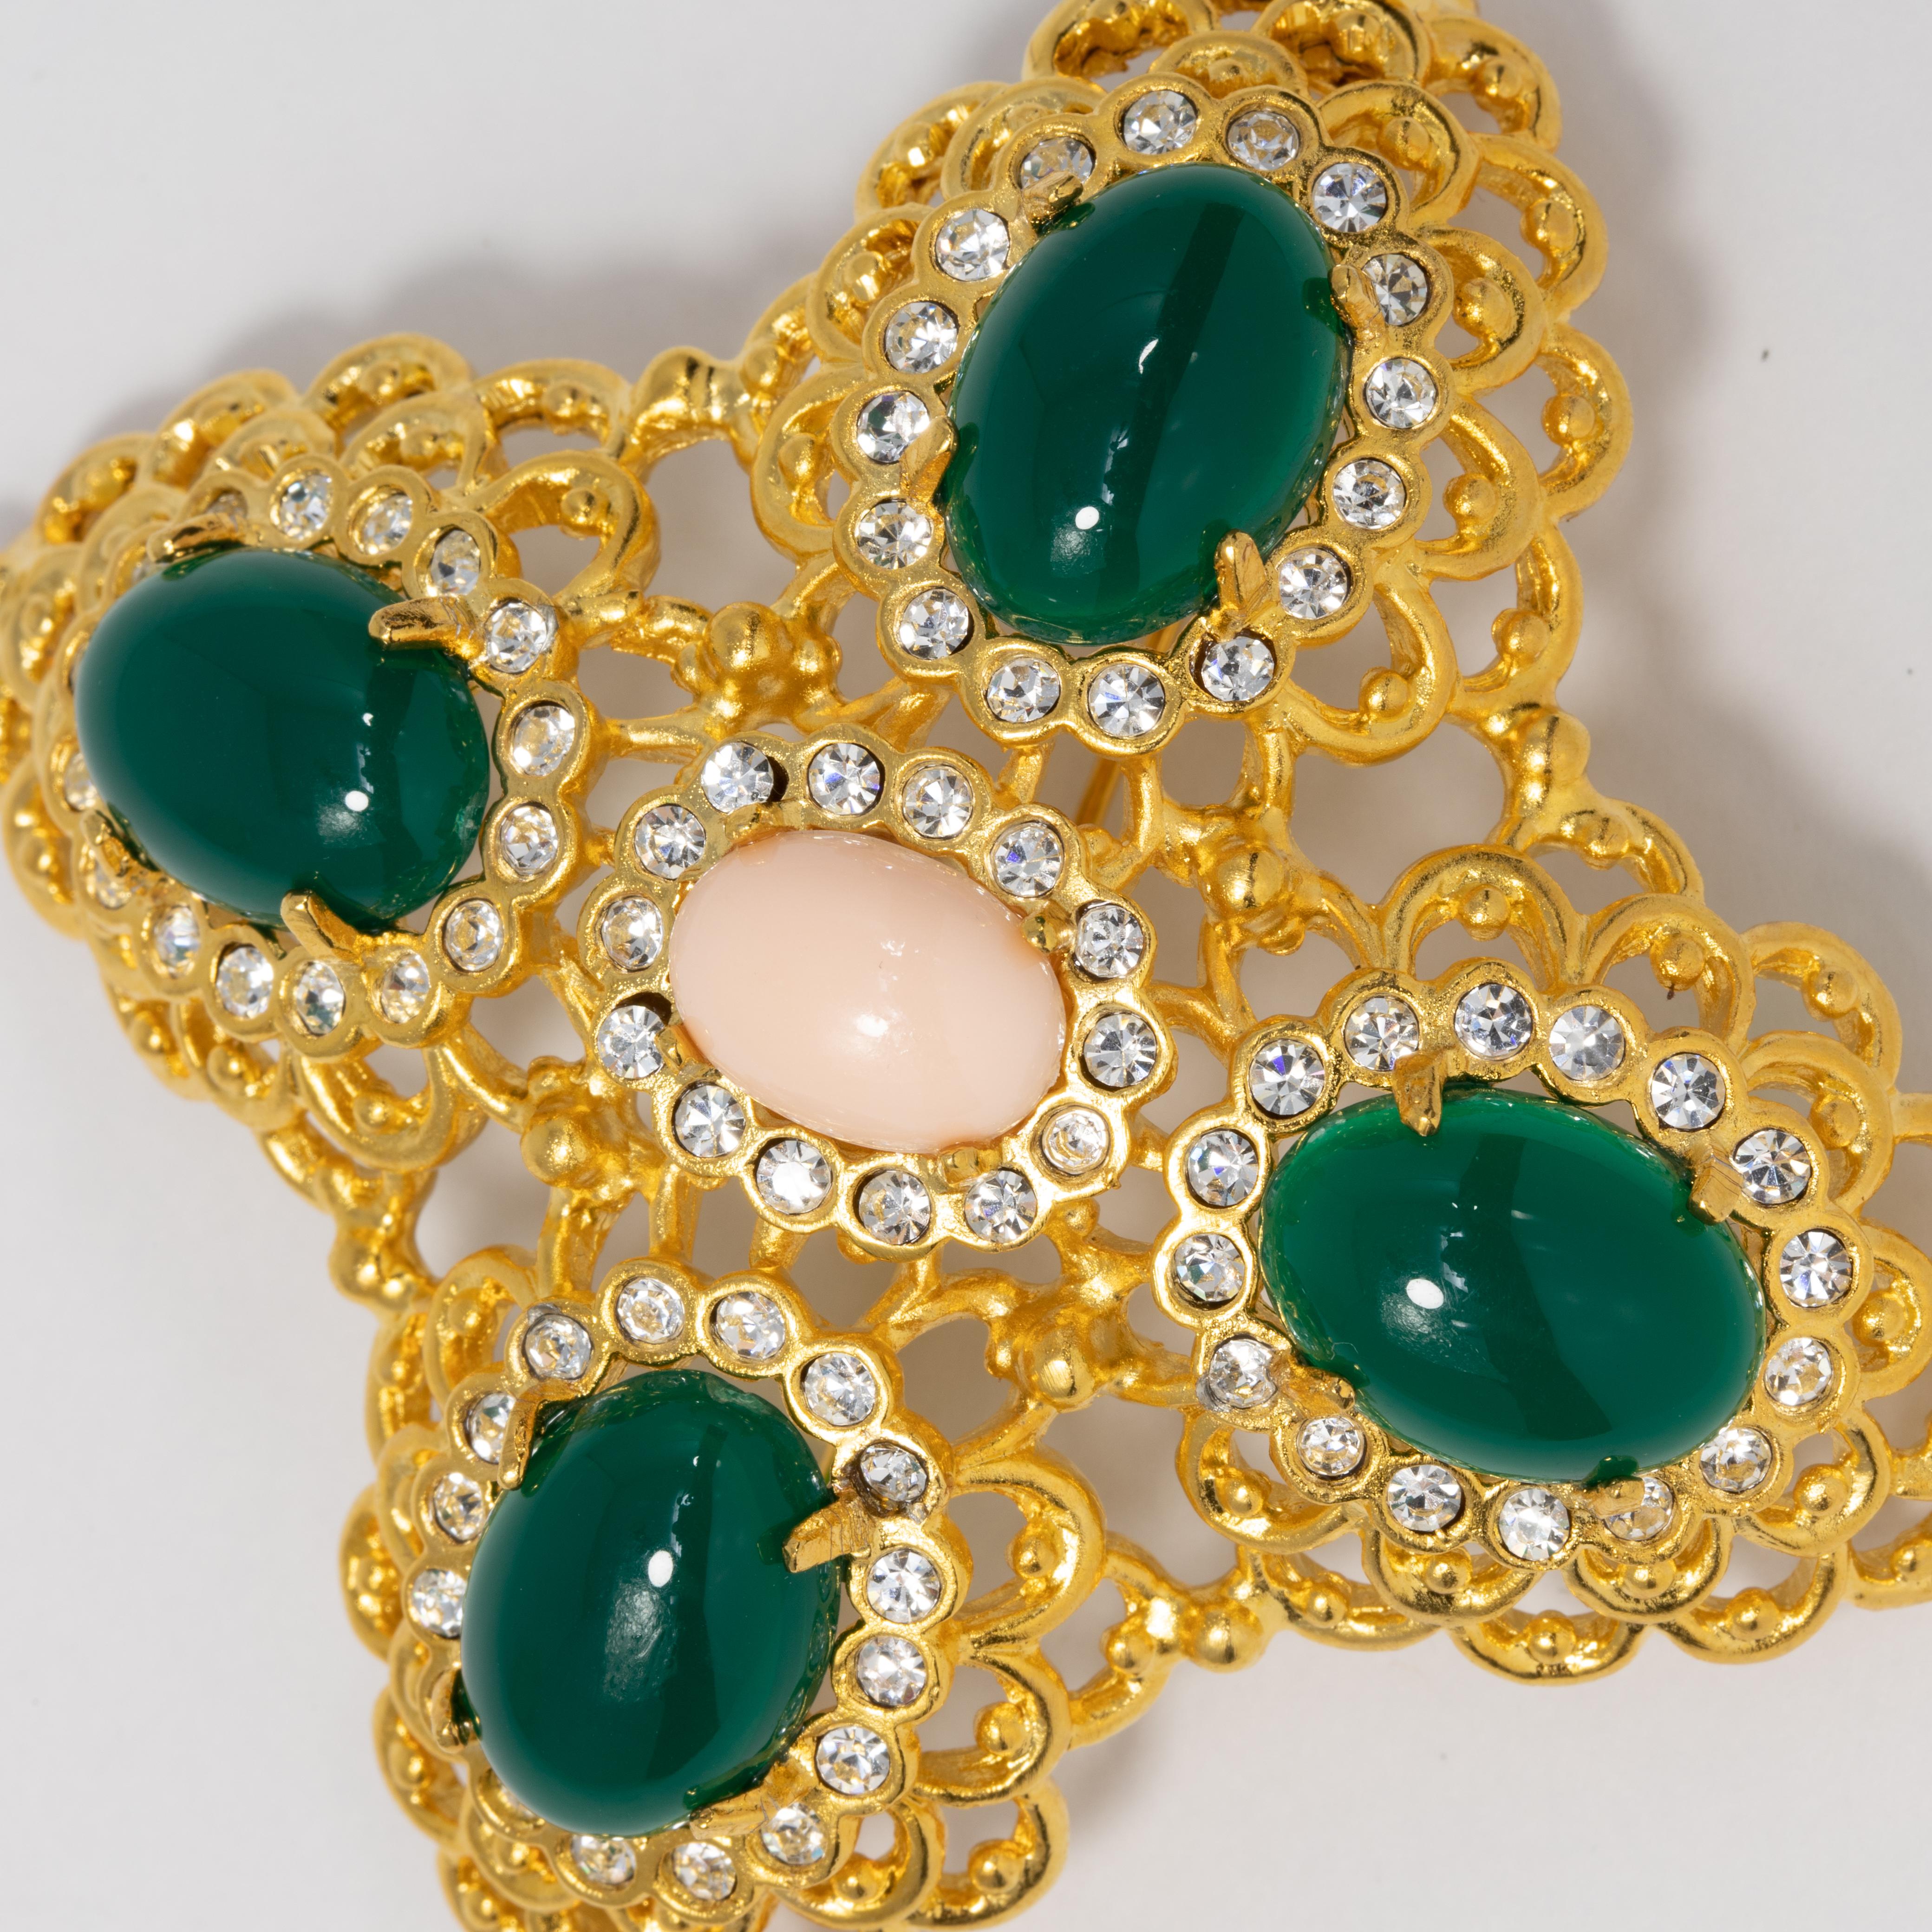 A stylish pin by Kenneth Jay Lane featuring prong-set green and pink cabochons, accented with clear crystals and set in a decorative filigree goldtone setting.

Hallmarks: Kenneth Lane